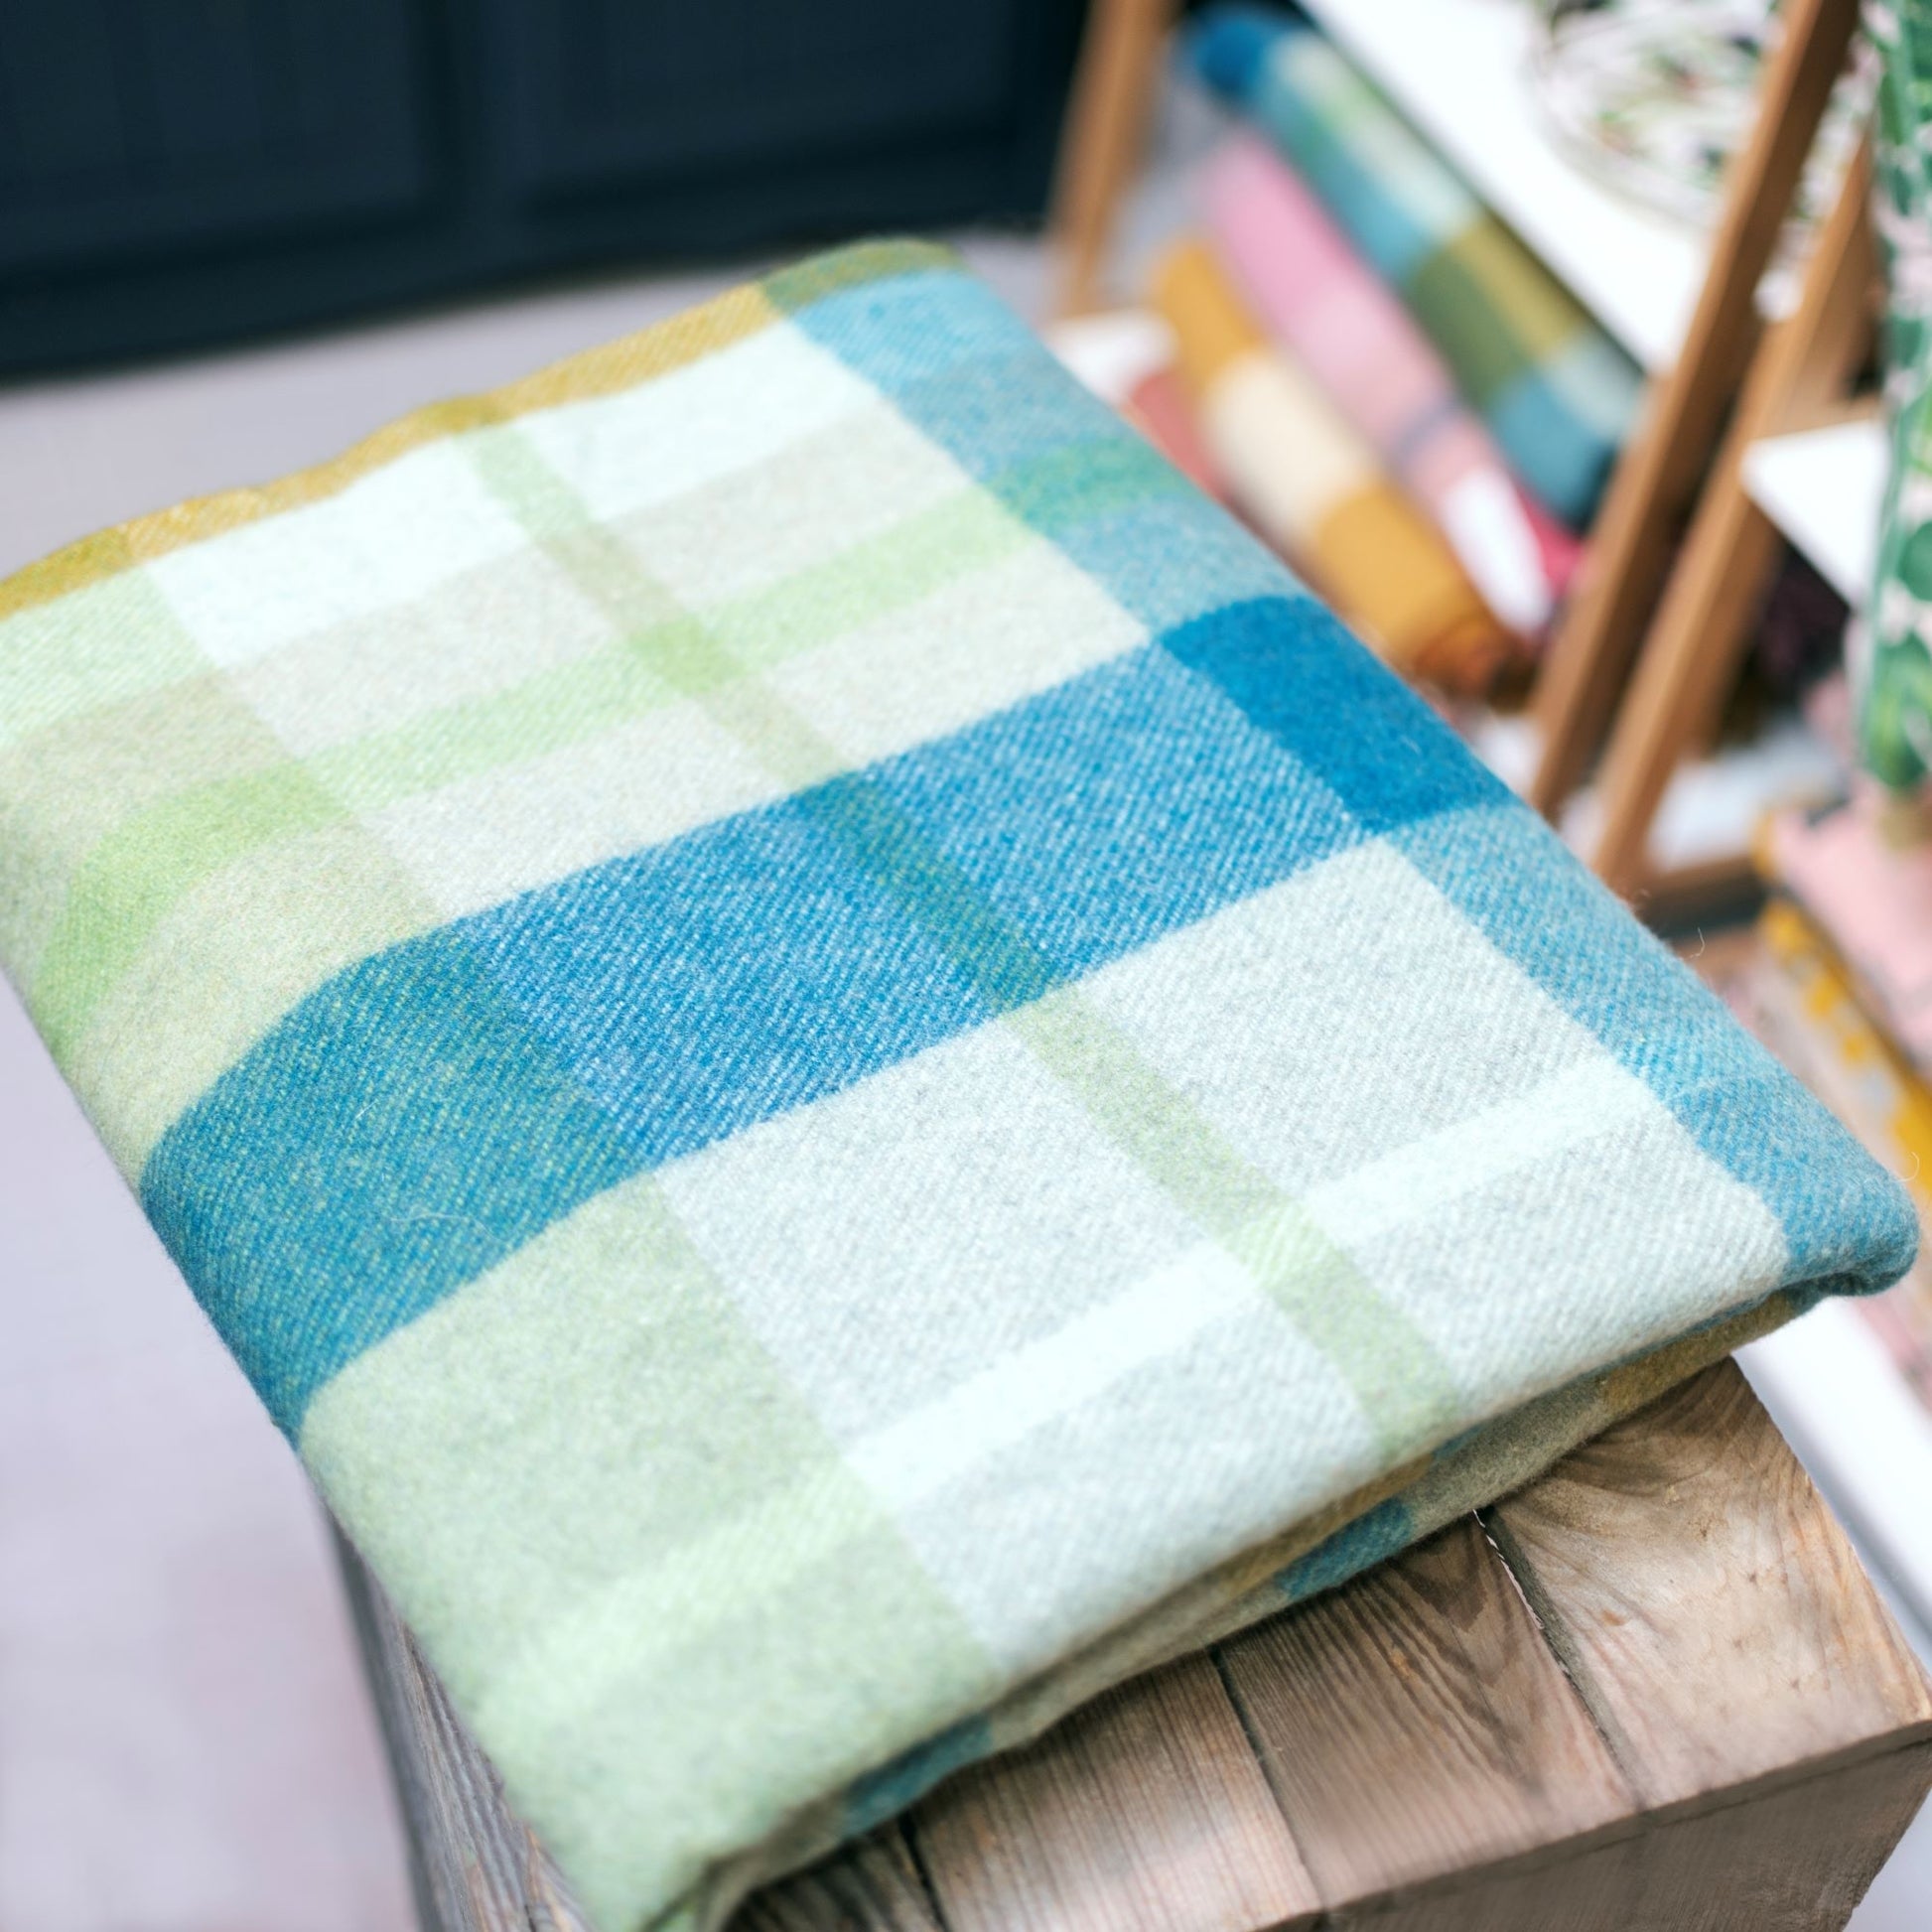 Recycled Wool Blanket in Teal Patchwork Check - The Bristol Artisan Handmade Sustainable Gifts and Homewares.